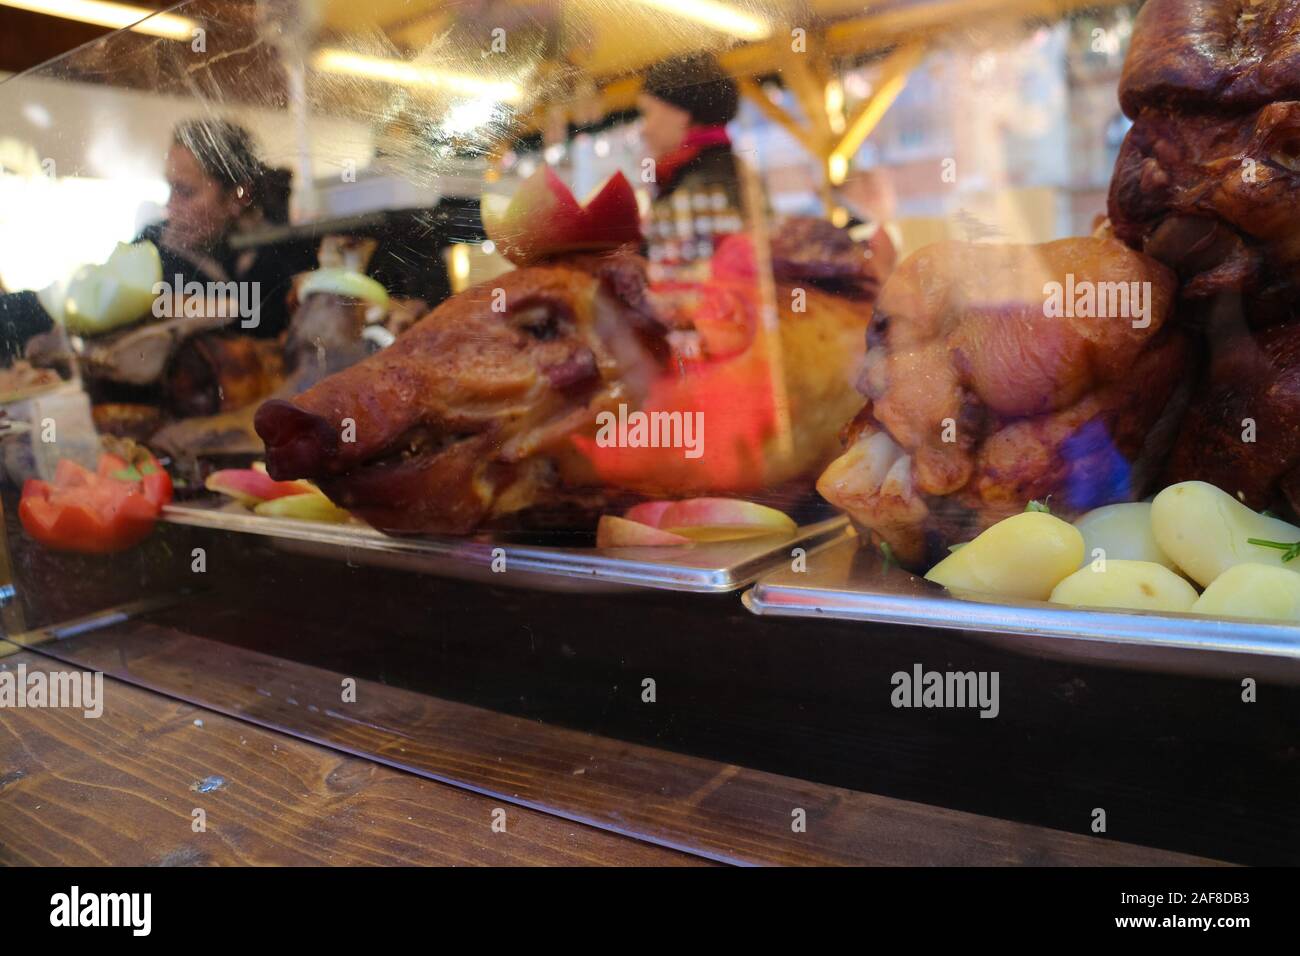 Budapest, Hungary - December 8, 2019: pig head of a roasted pork with apples on display at a market stall on one of Budapest's christmas markets. Stock Photo